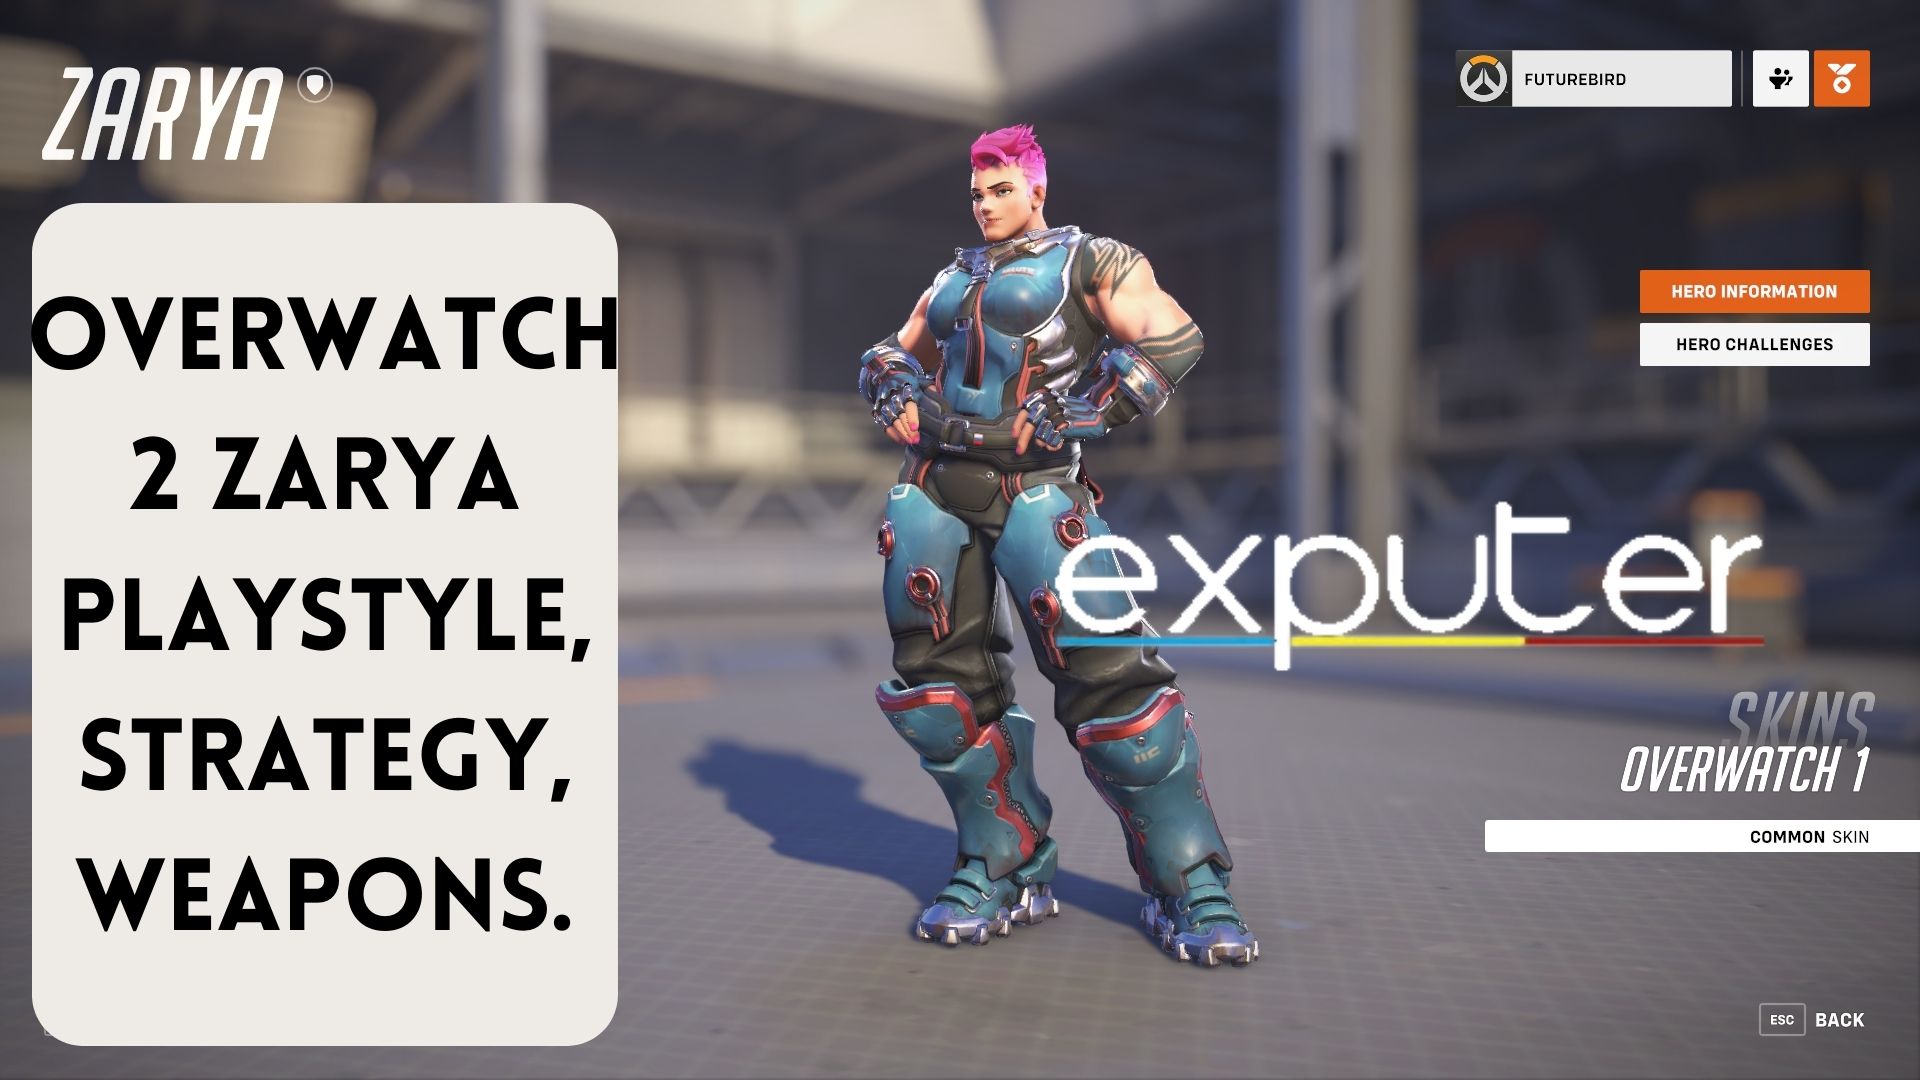 Zarya Playstyle, Strategy, Weapons in Overwatch 2